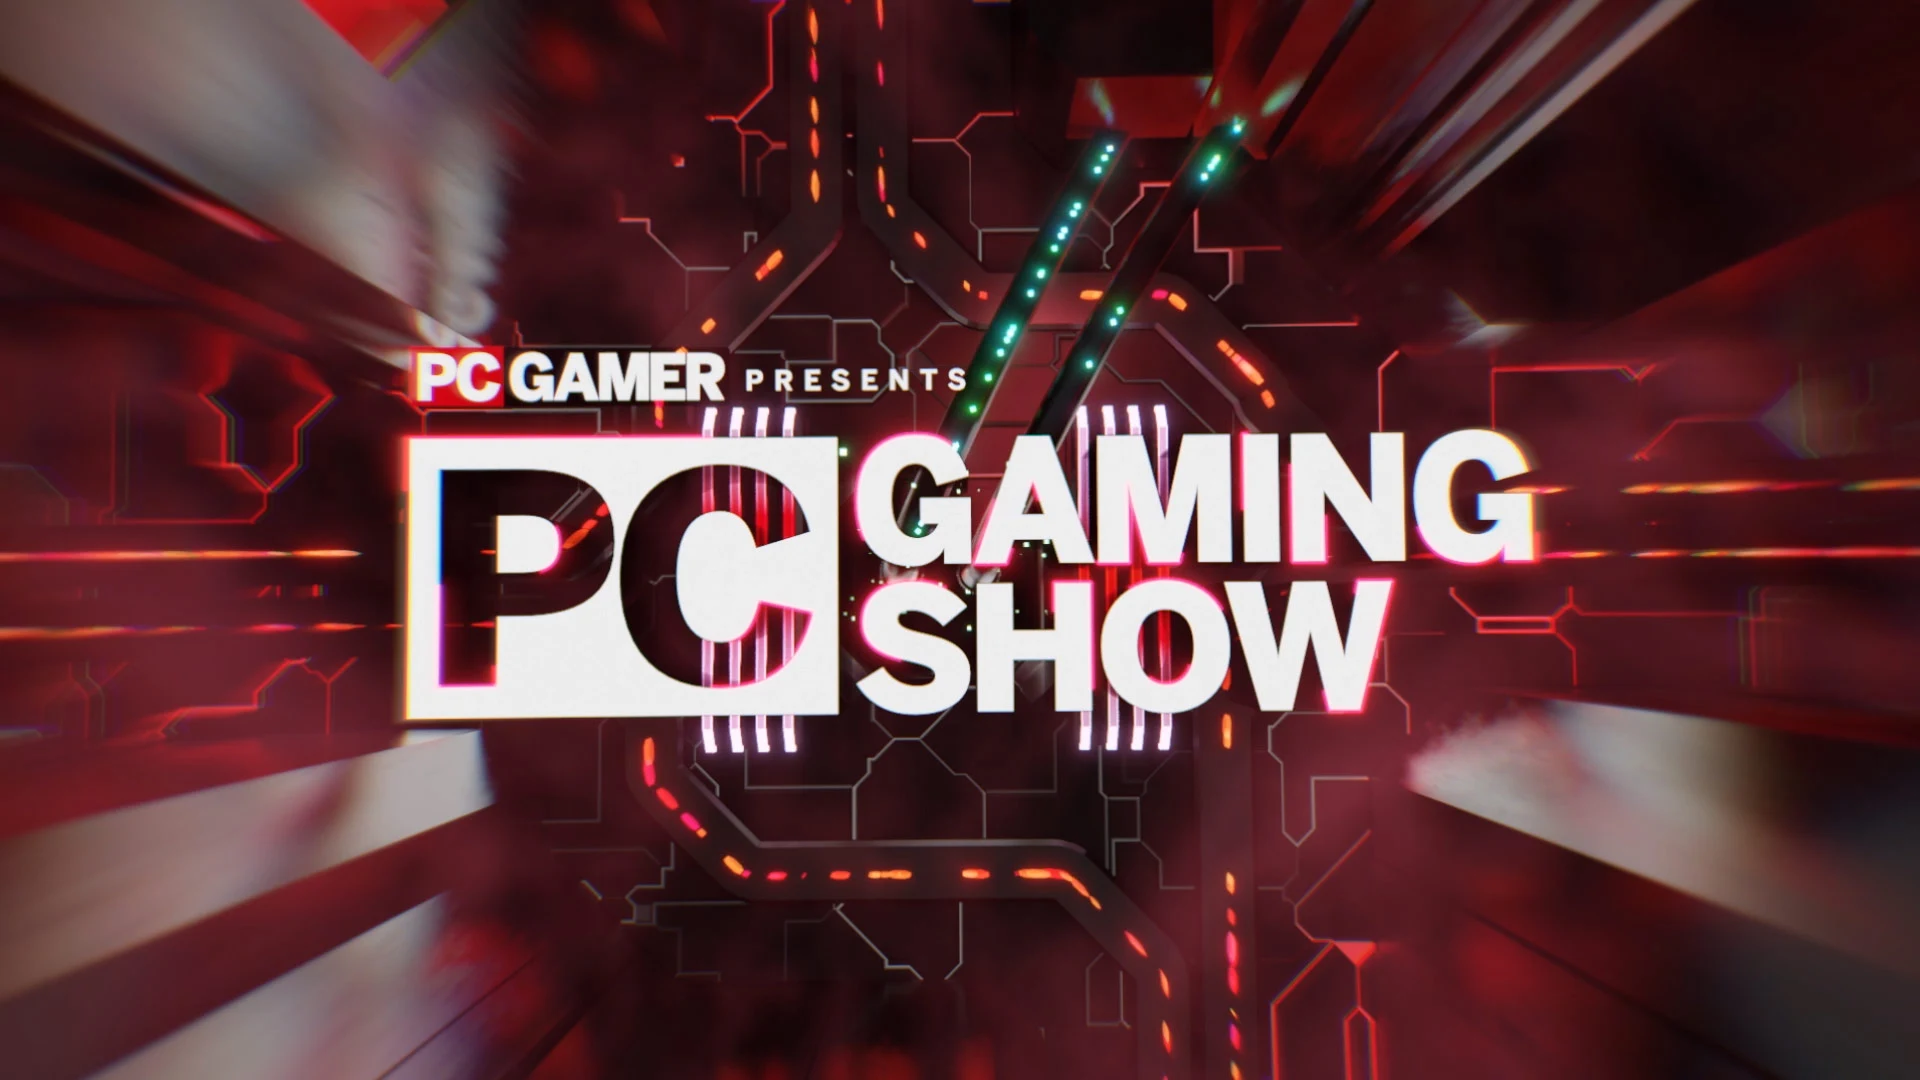 The Official Co-Streamers of the PC Gaming Show